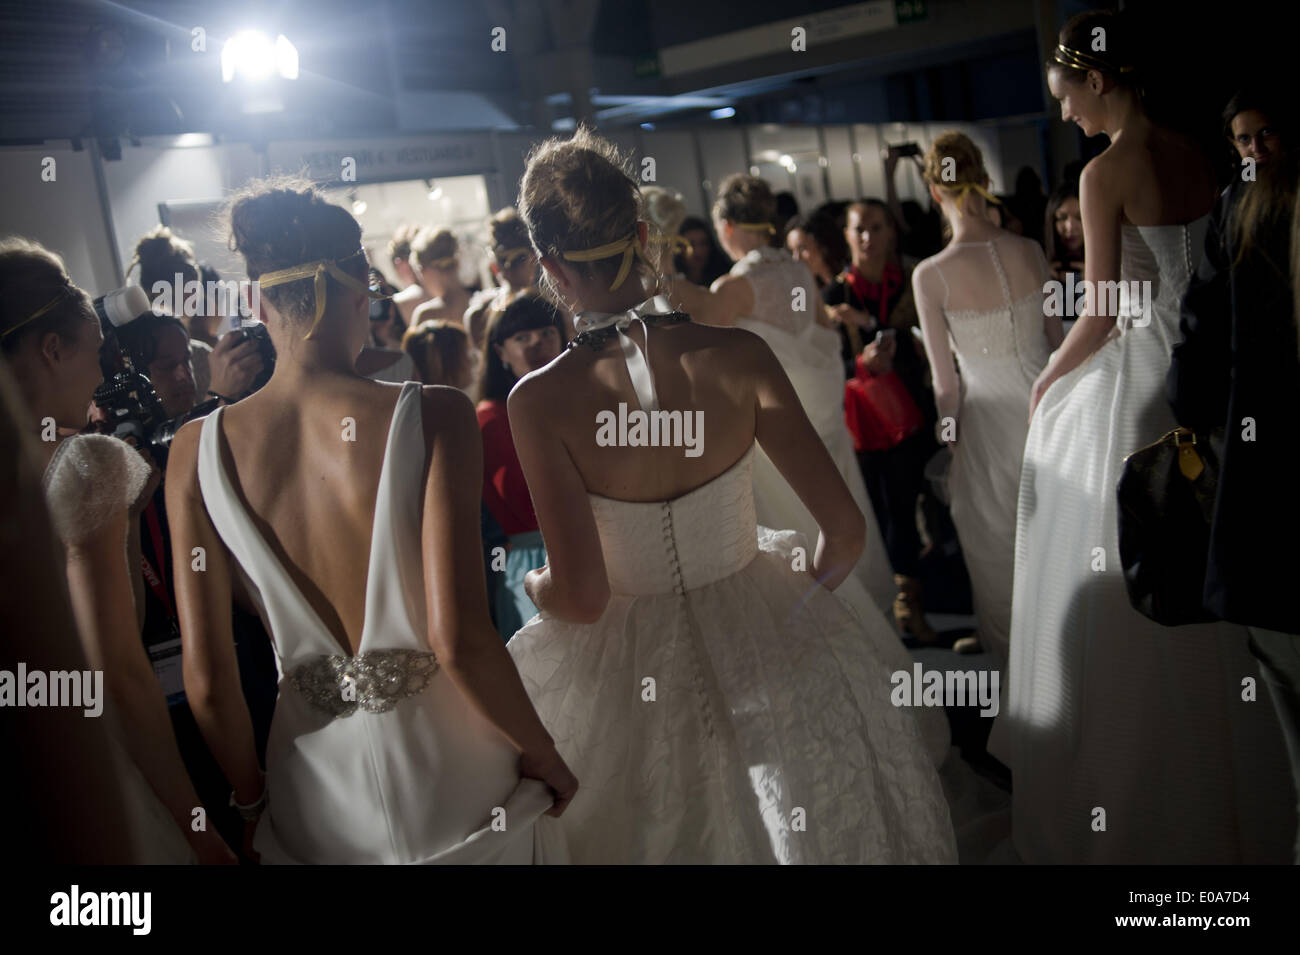 Barcelona, Spain. 7th May, 2014.   Models dressed as brides wait at the backstage corridors before going on catwalk. Barcelona Bridal Week is a fashion industry event that includes Gaudi Novias (brides) Catwalk. Credit:  Jordi Boixareu/ZUMA Wire/ZUMAPRESS.com/Alamy Live News Stock Photo